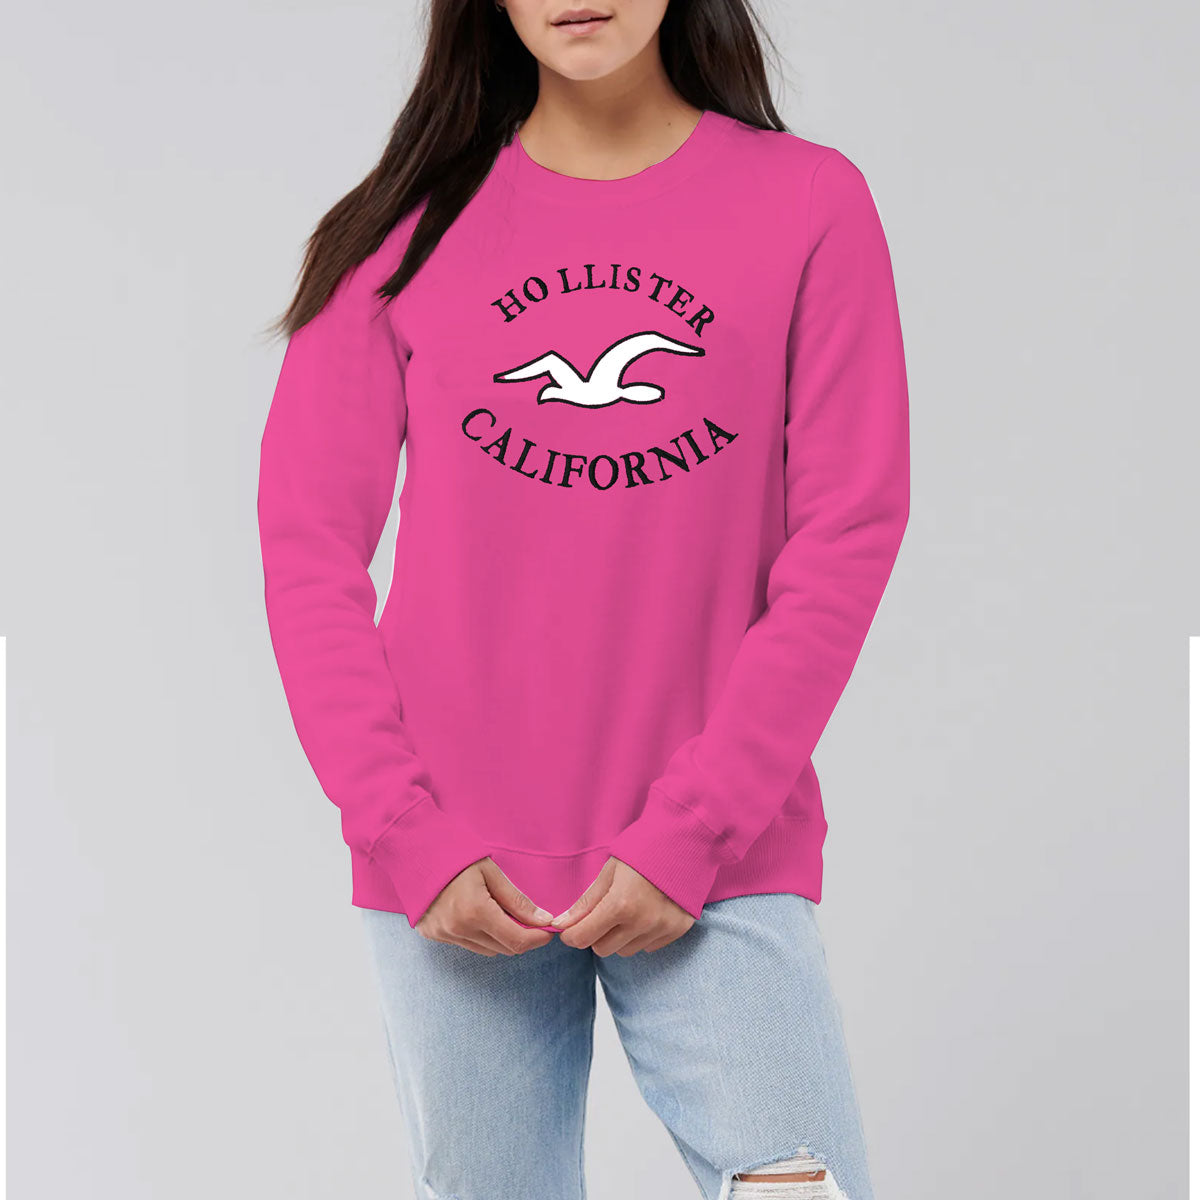 APPLIGUE EMBROIDERED WOMEN SWEAT SHIRT